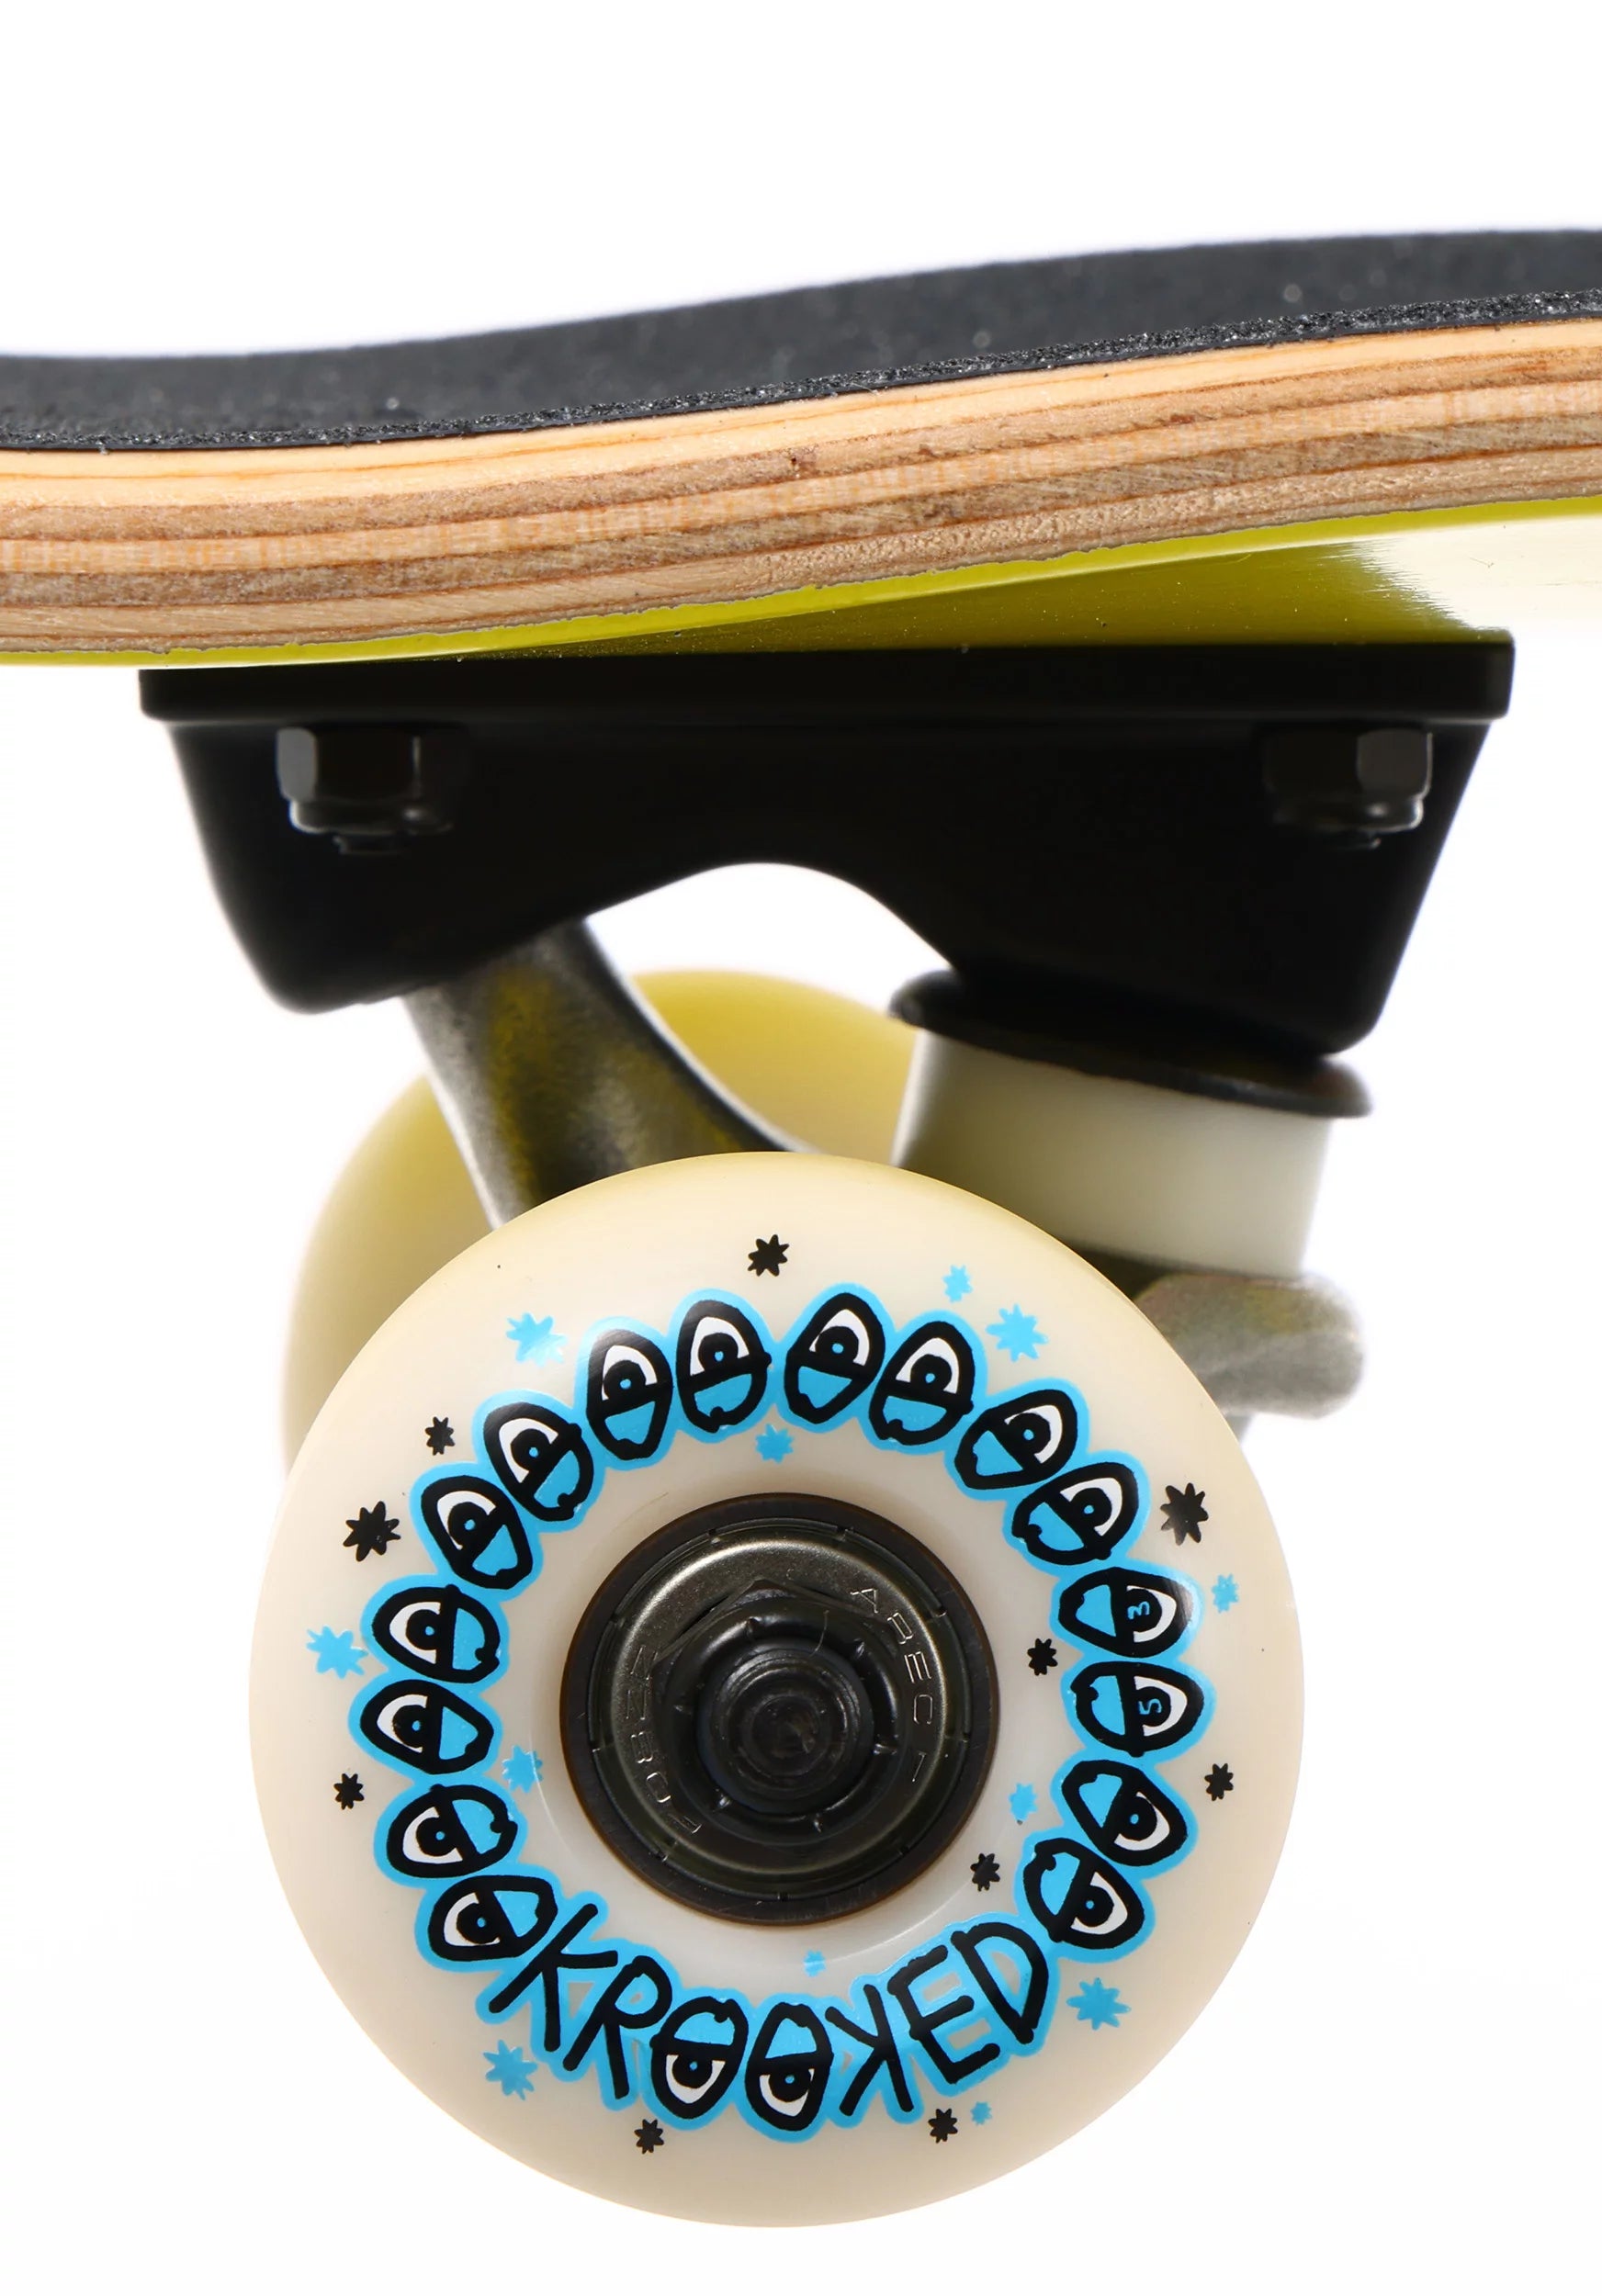 SKATEBOARD COMPLET KROOKED STYLE 8&quot;